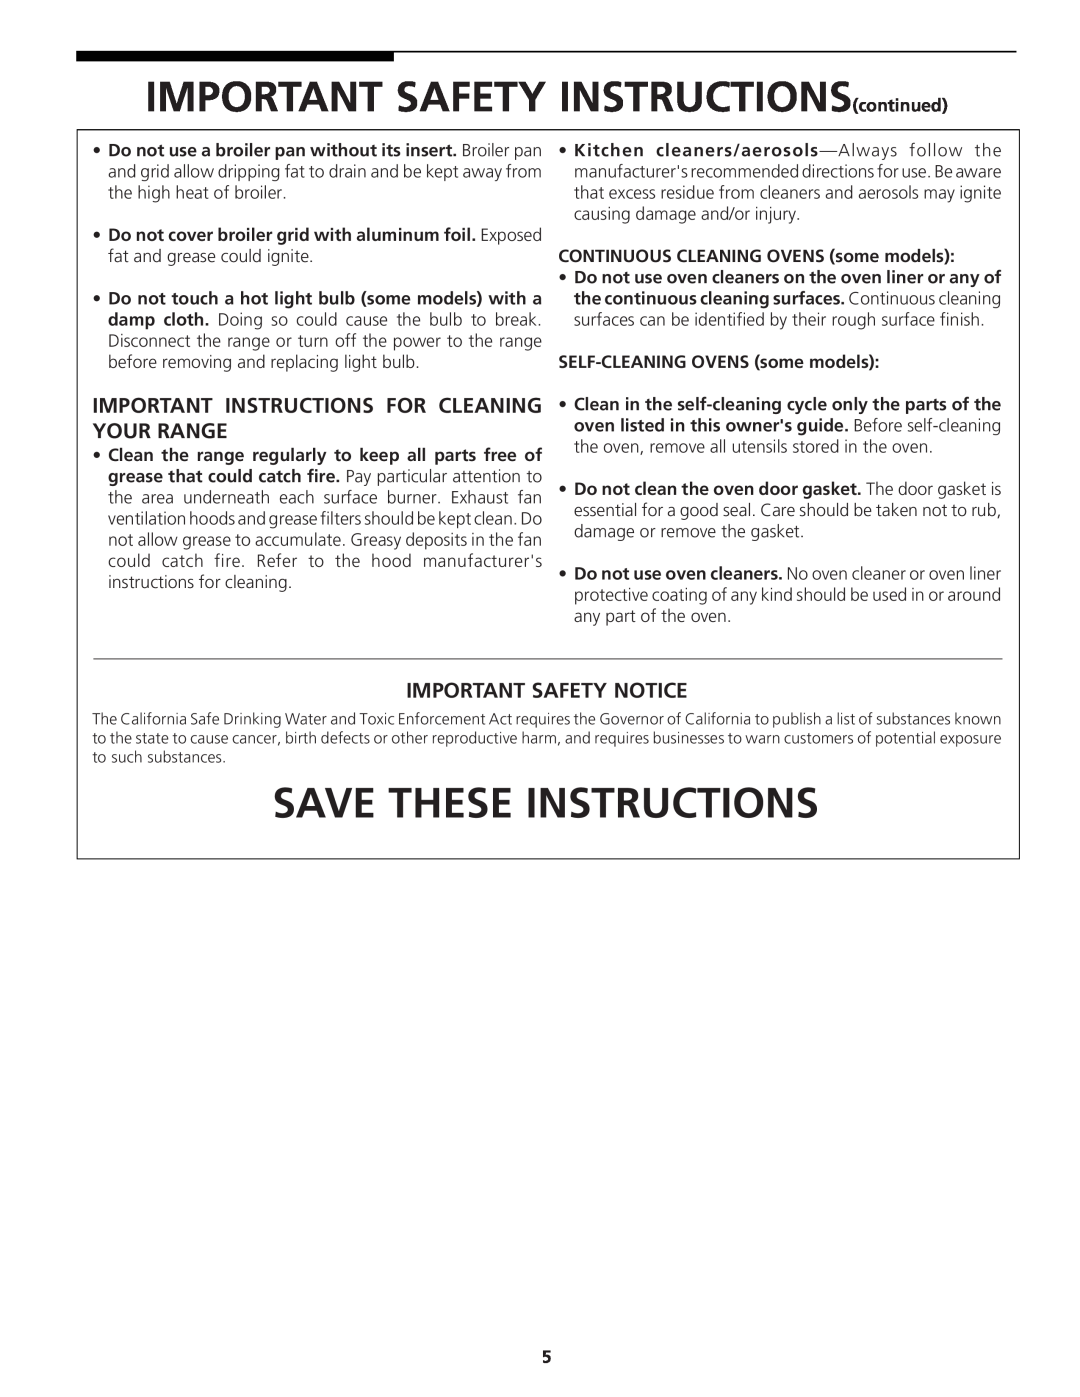 Tappan 318200764 manual Save These Instructions, Important Instructions For Cleaning Your Range, Important Safety Notice 